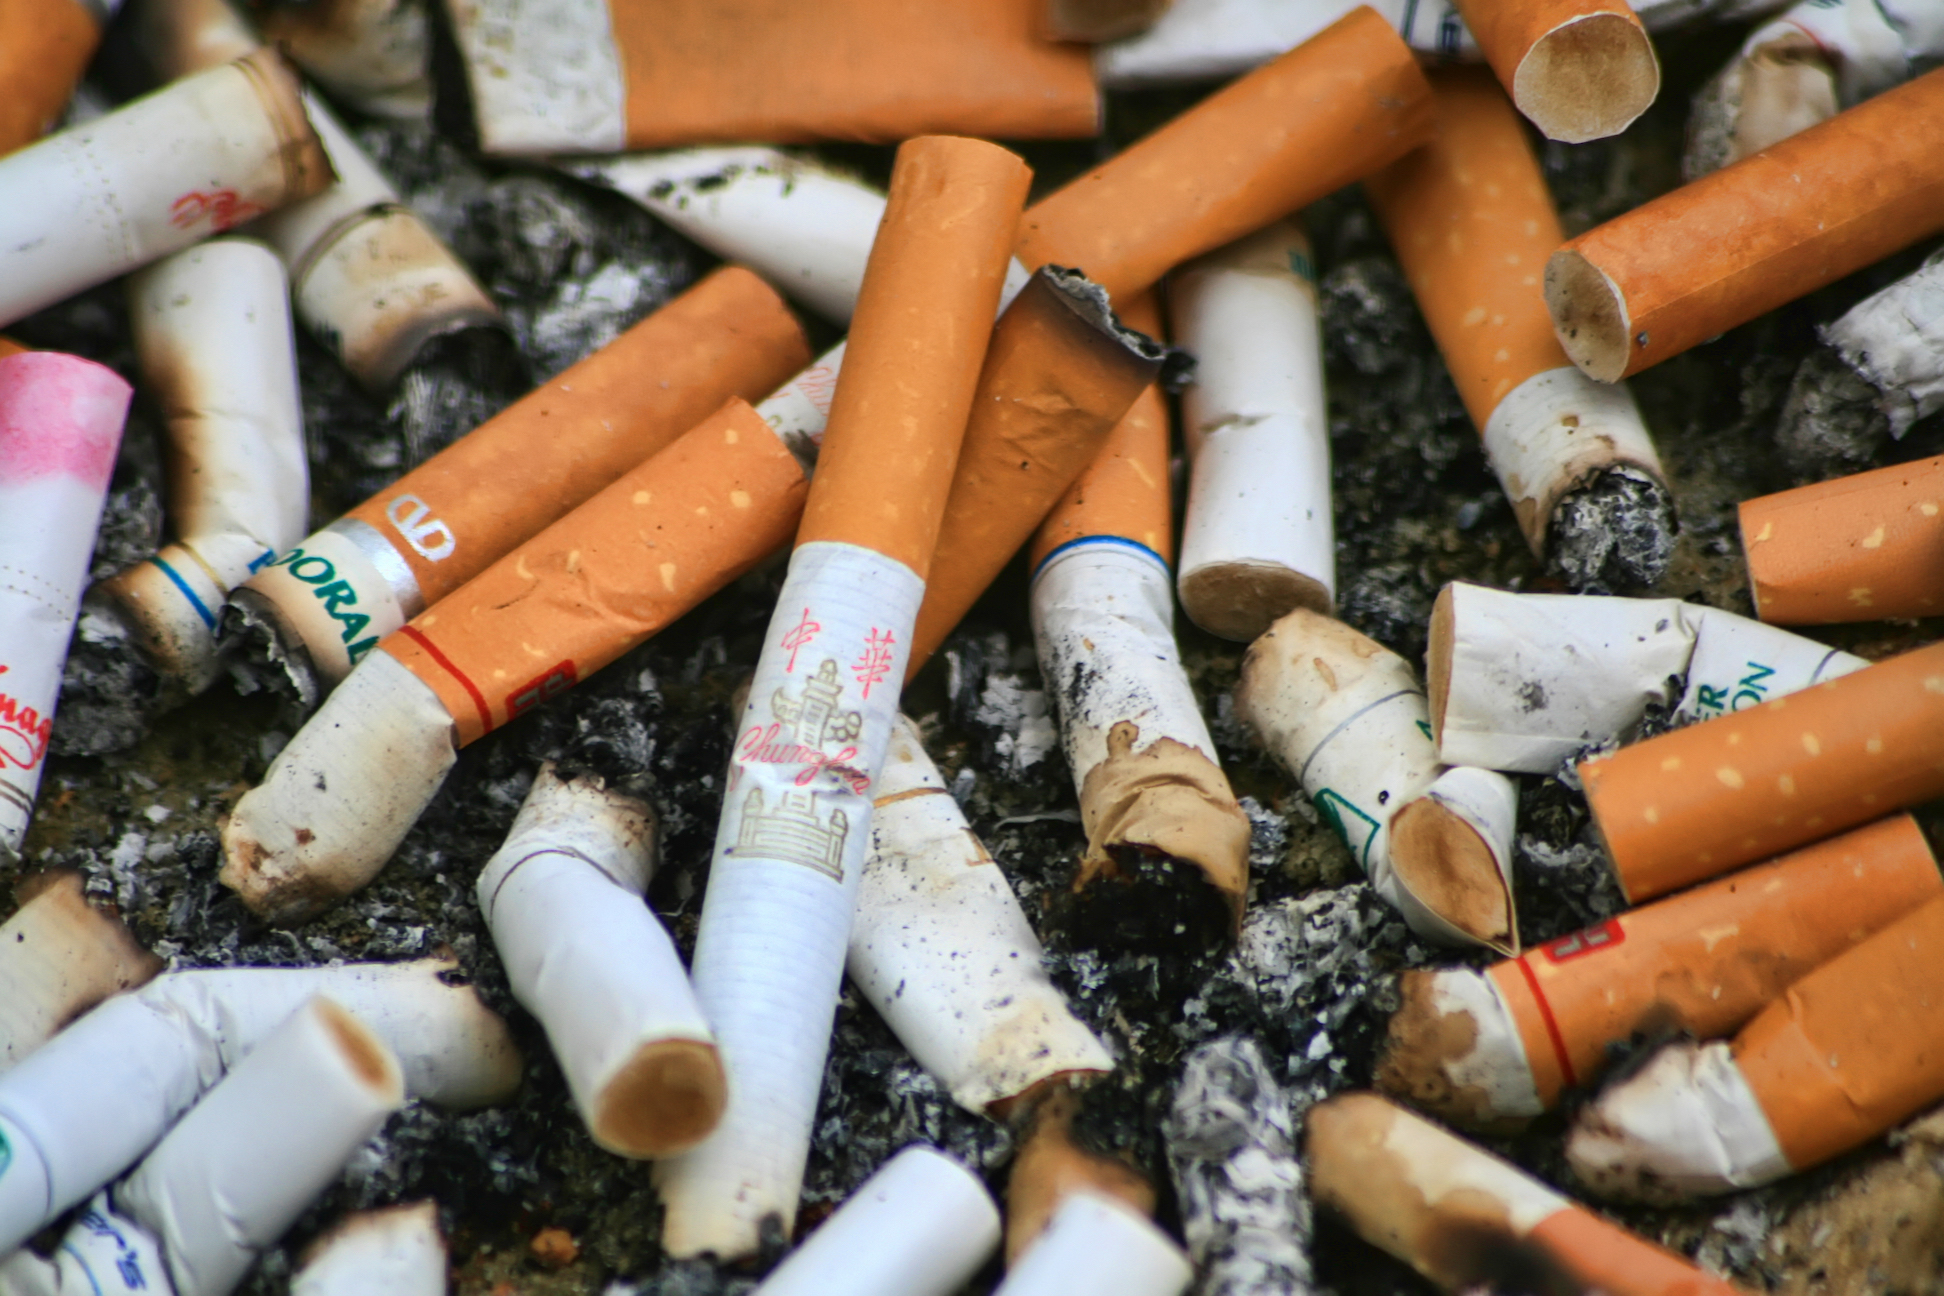 Smoking is one of the leading causes of lung cancer.